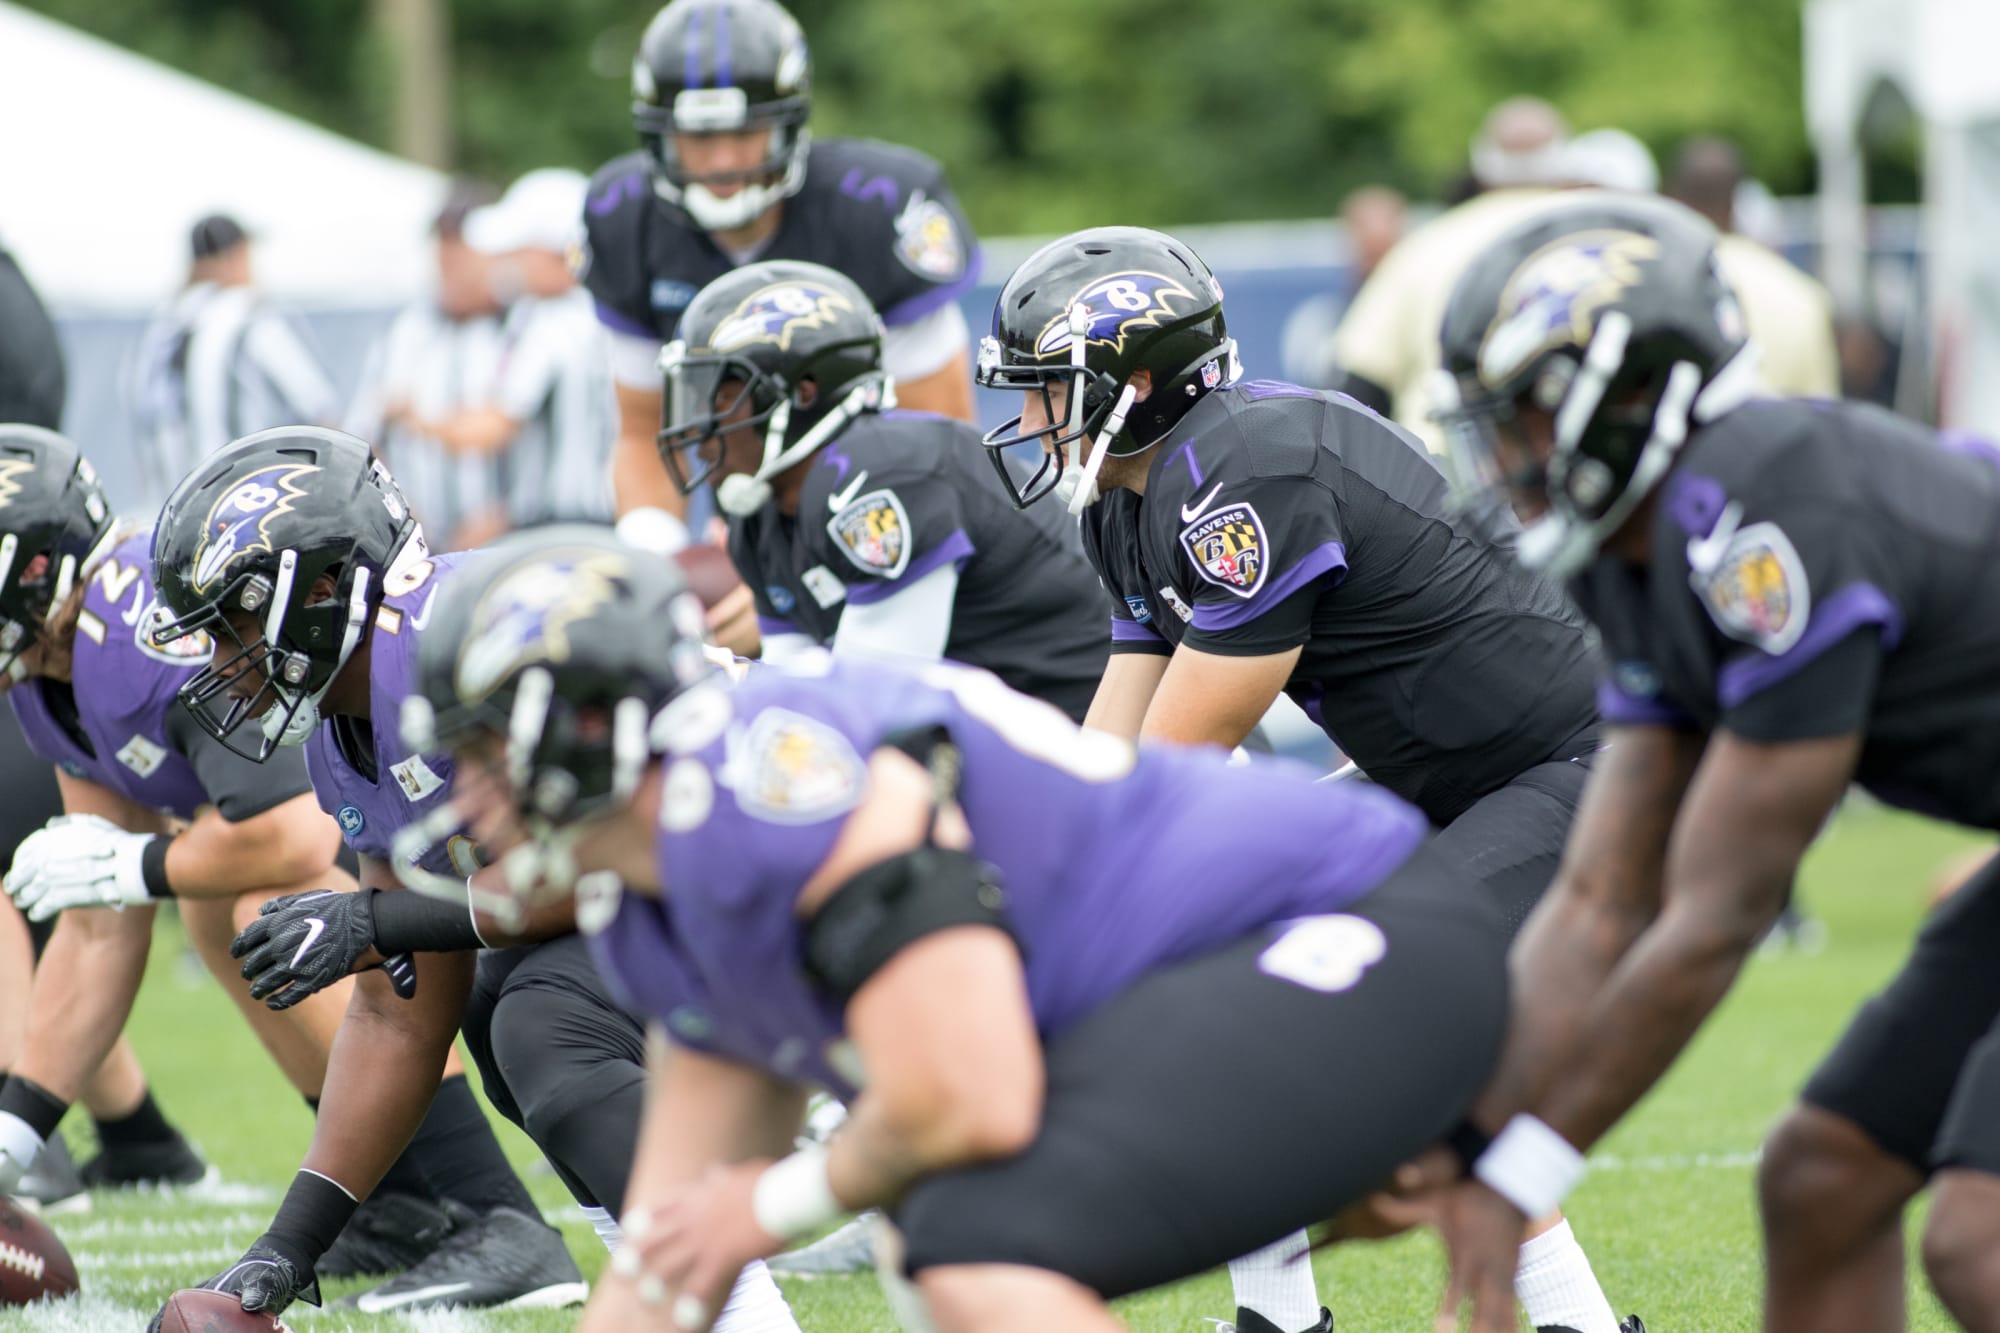 Ravens training camp 3 key storylines to watch in 2020